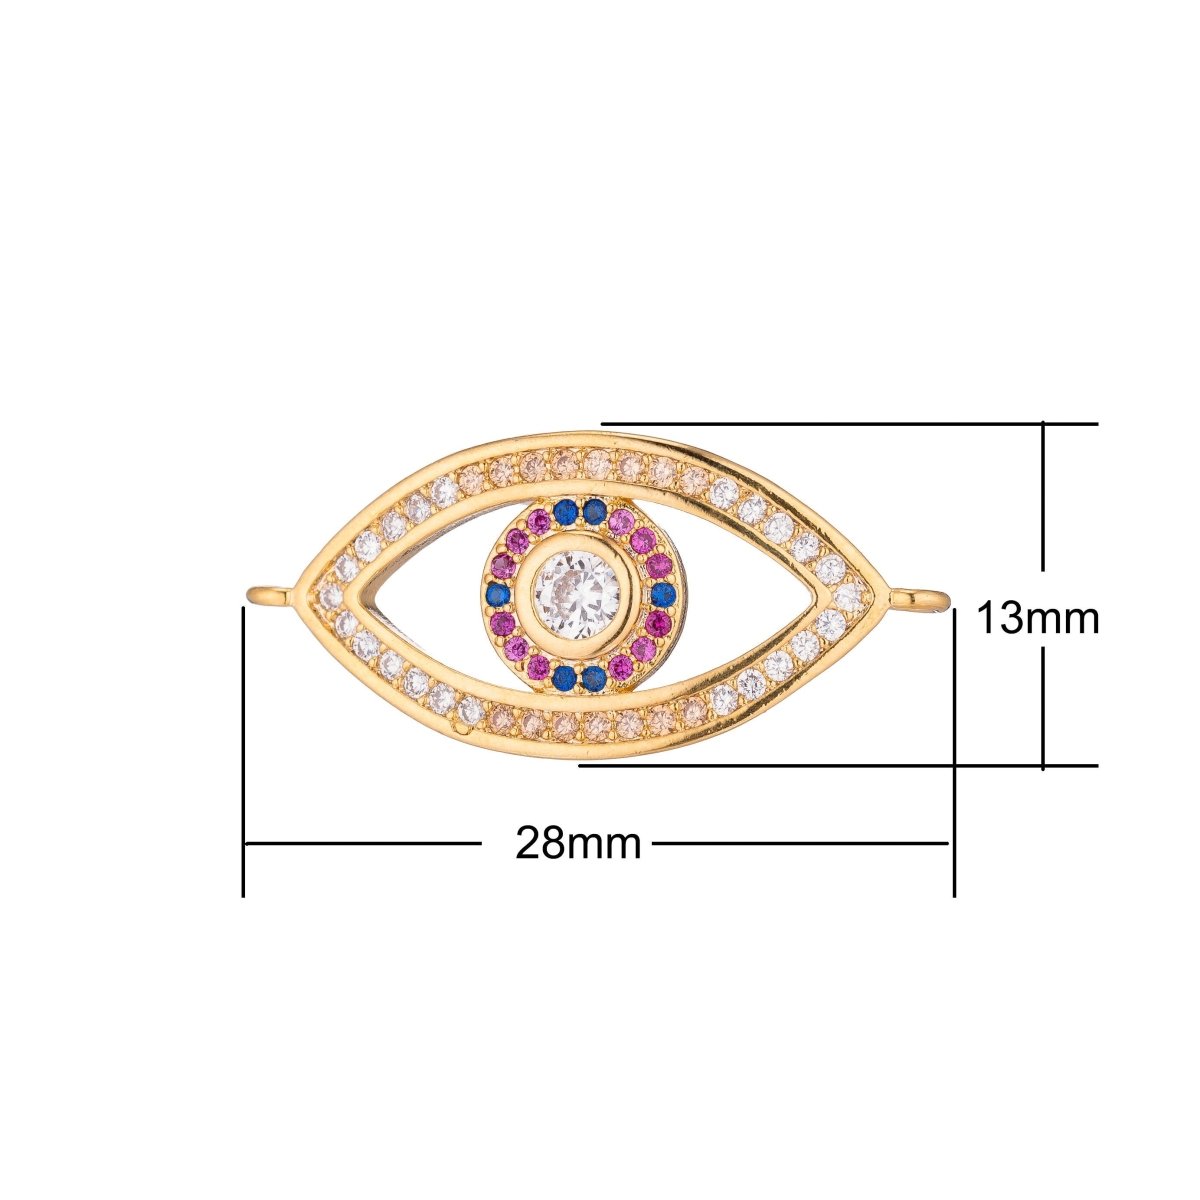 DEL- Gold Turkish Evil Eye, Lucky Charm, Safe Protection, Wish Well, Cubic Zirconia Bracelet Charm Bead Finding Connector For Jewelry Making F-252 - DLUXCA